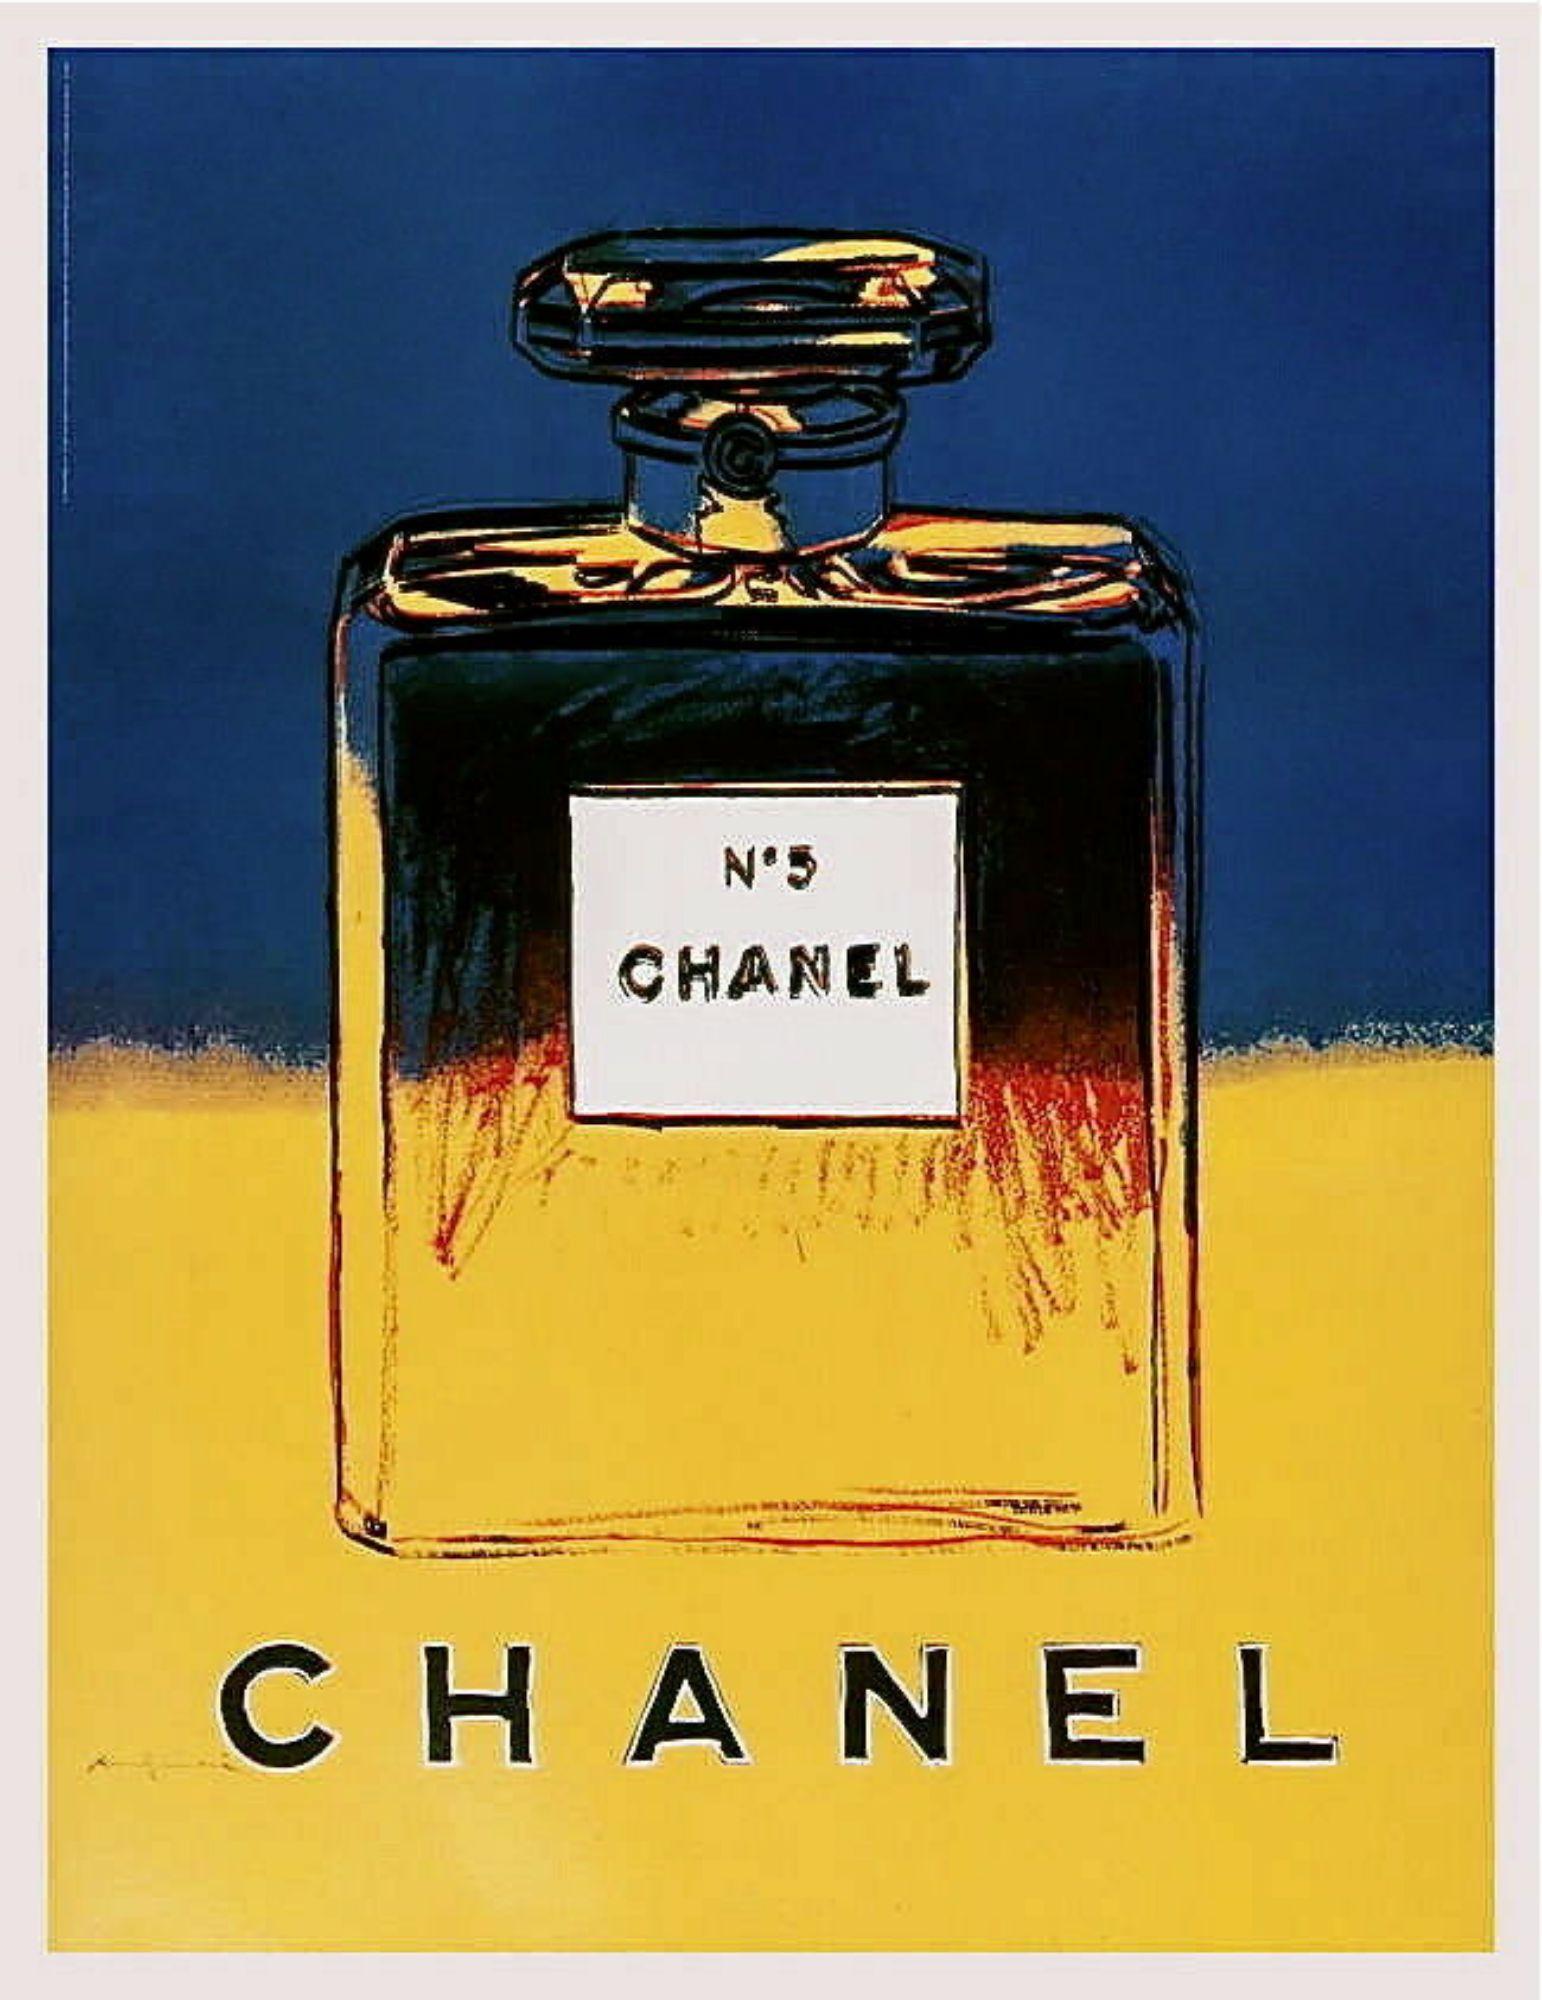 Chanel Perfumes for sale in Five Lakes, Michigan